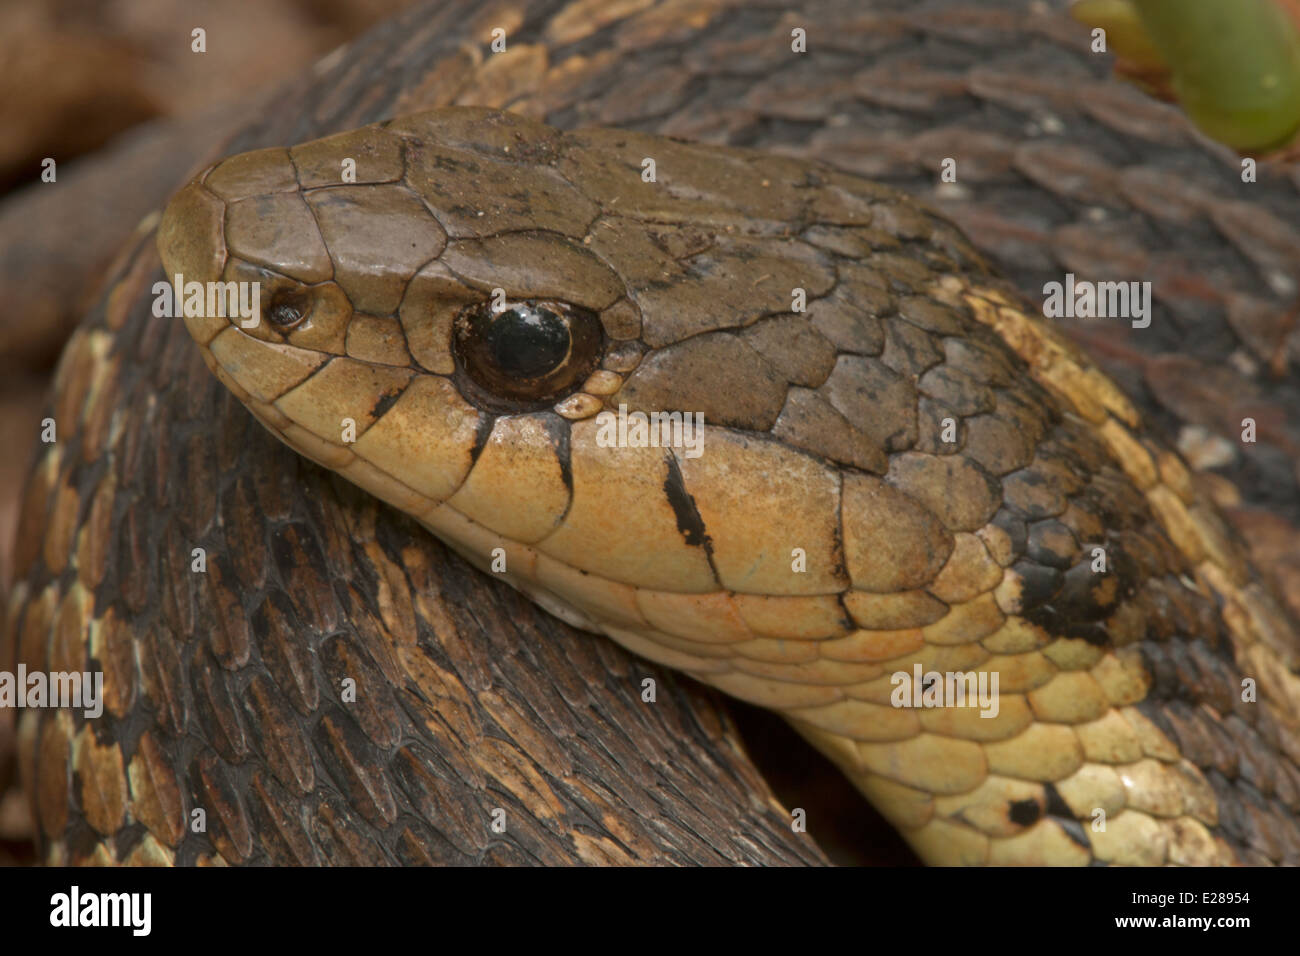 , Thamnophis sirtalis, New York Banque D'Images